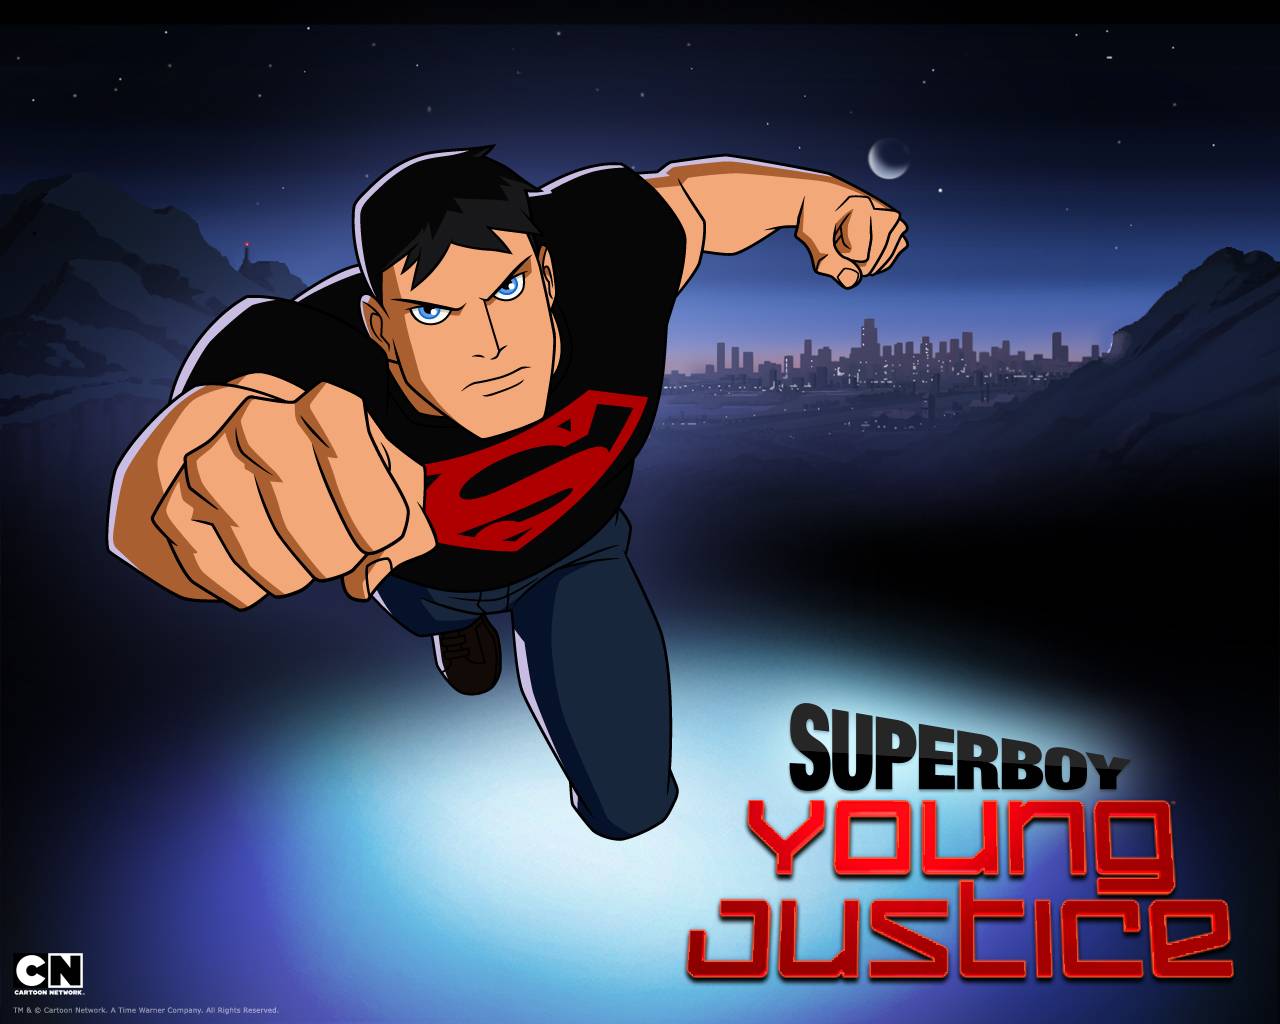 Superboy from young justice surface wallpaper